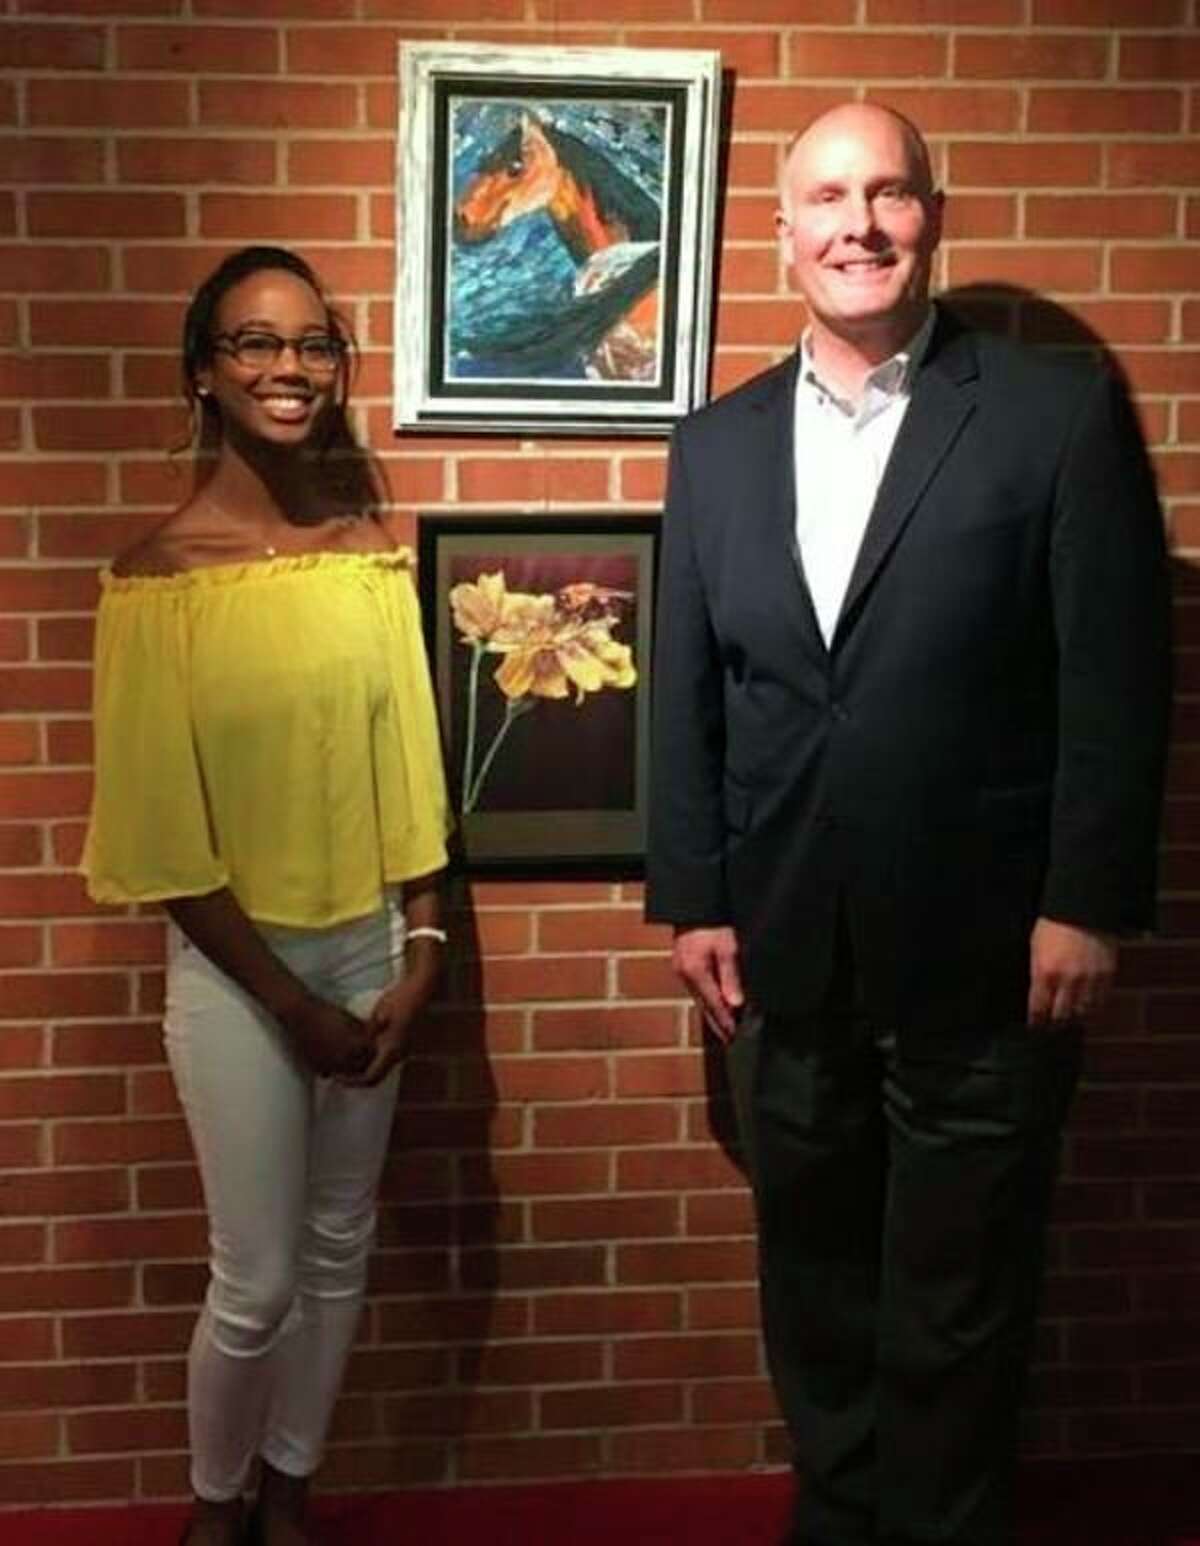 FILE — U.S. Rep. John Moolenaar congratulates Genesia Thompson on winning the Congressional Art Competition for Michigan's Fourth Congressional District during a presentation at the Midland Center for the Arts on May 2, 2018. Thompson's winning piece, 'October,' is in the center. It features marigolds and a bee.